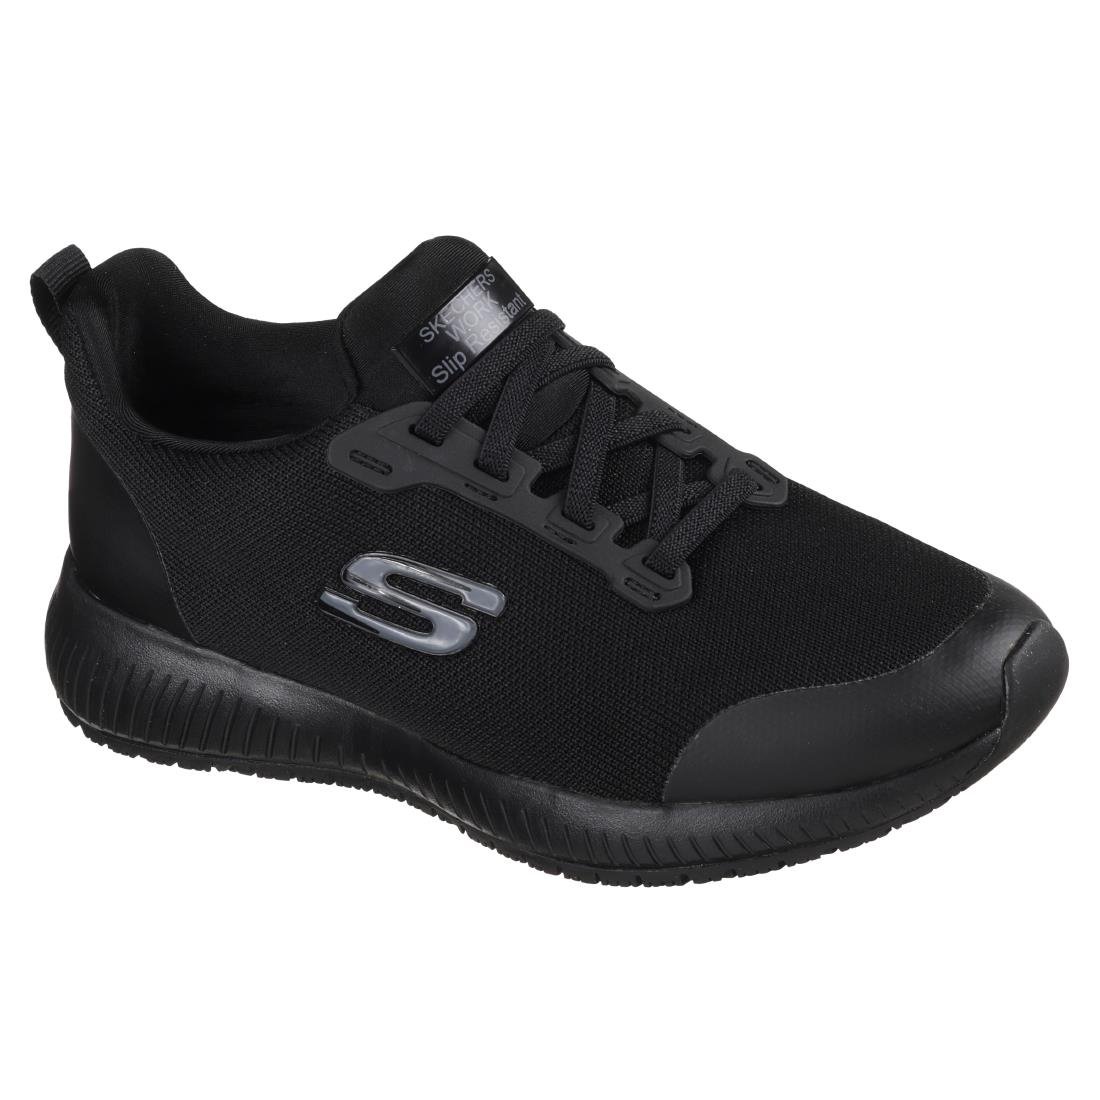 BB672-40 Skechers Womens Slip Resistant Squad Trainer Size 40 JD Catering Equipment Solutions Ltd